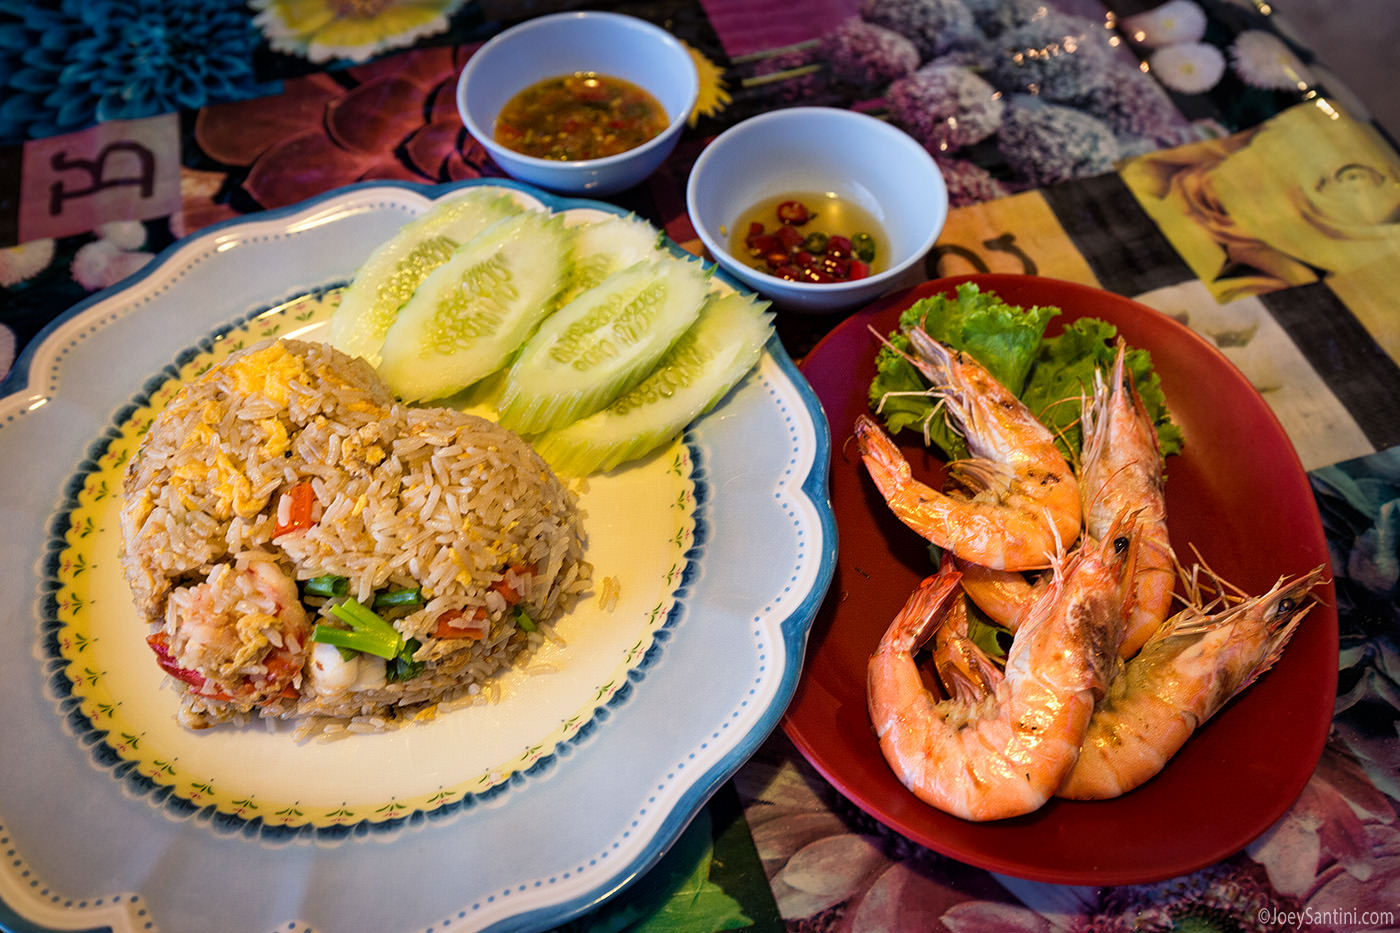 Fried rice and red shrimps on dishes